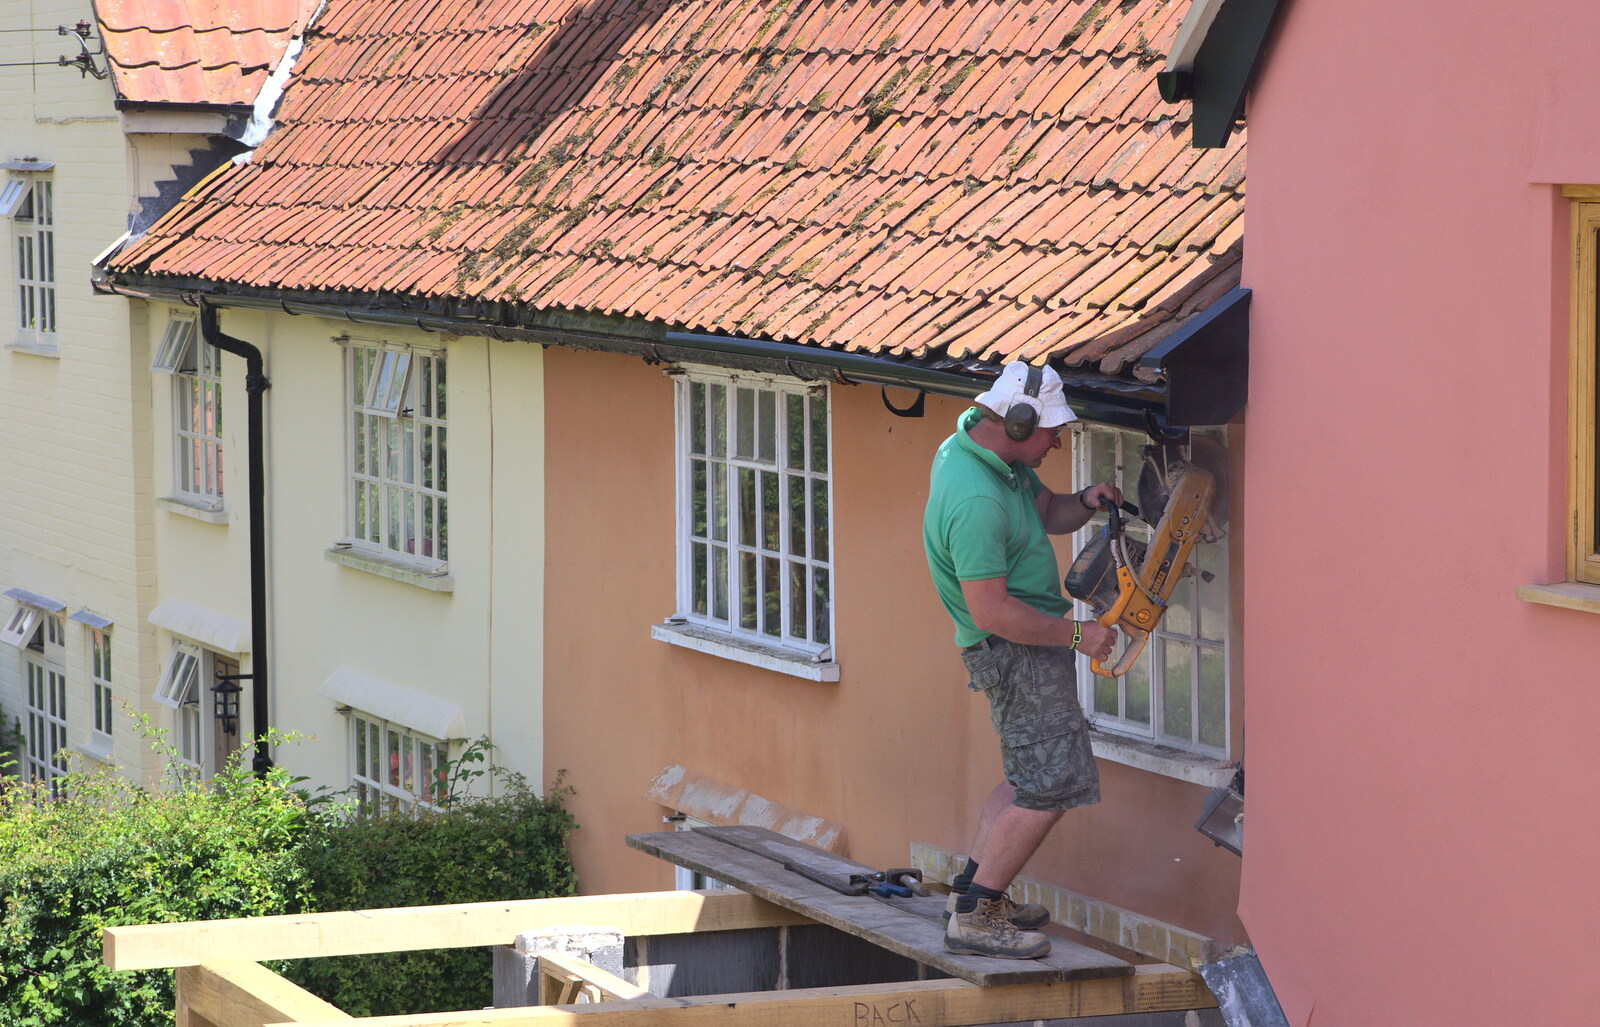 Andrew cuts out the old window from The Village Summer Fête, Brome, Suffolk - 5th July 2014